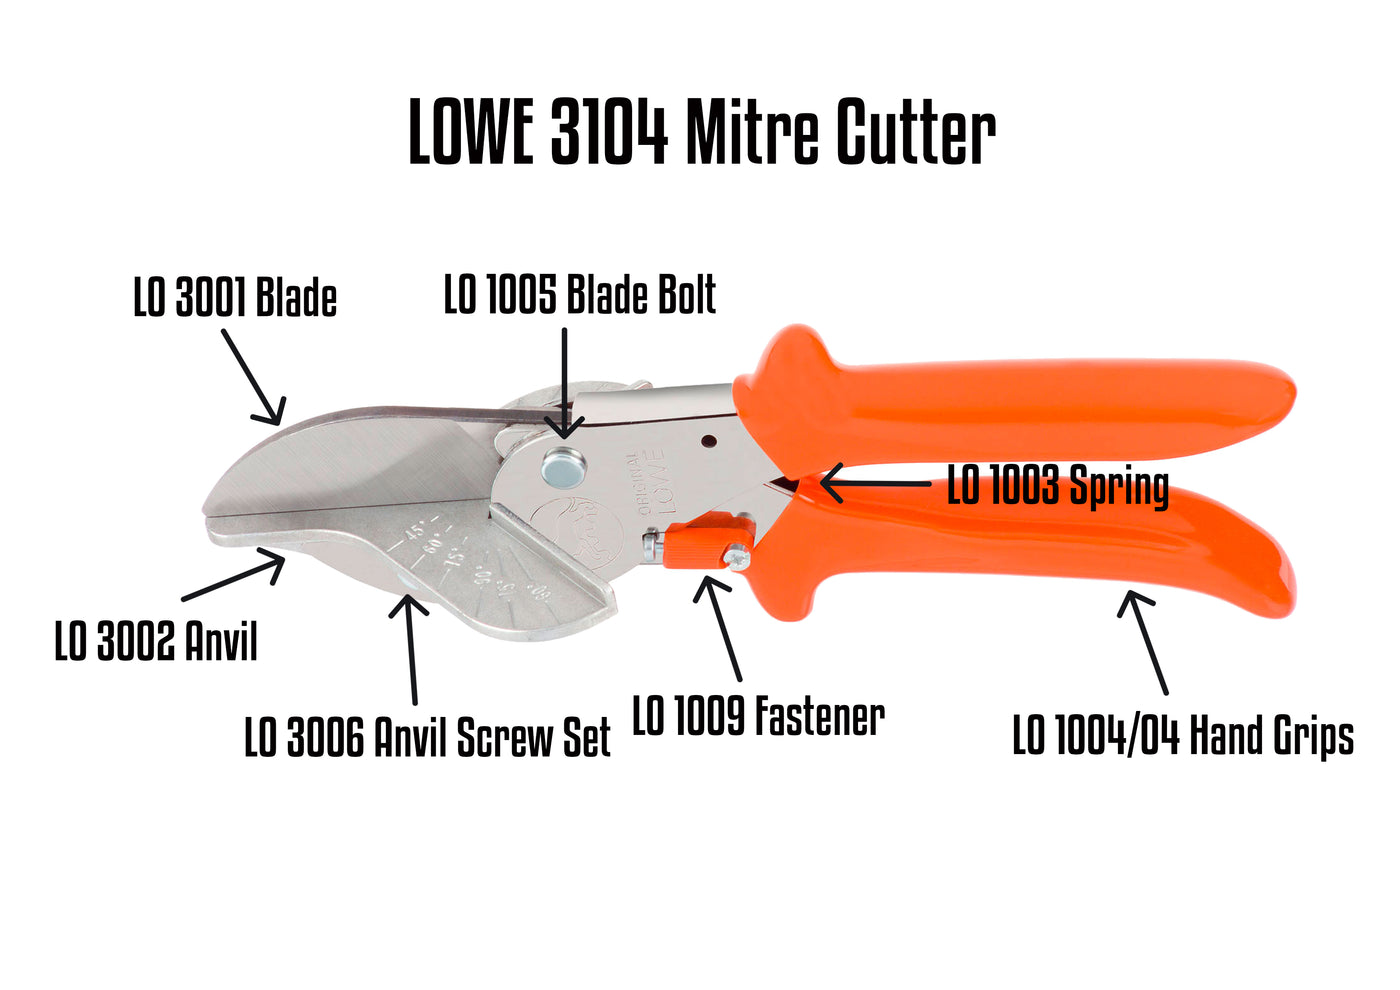 Lowe 3104 Parts Guide